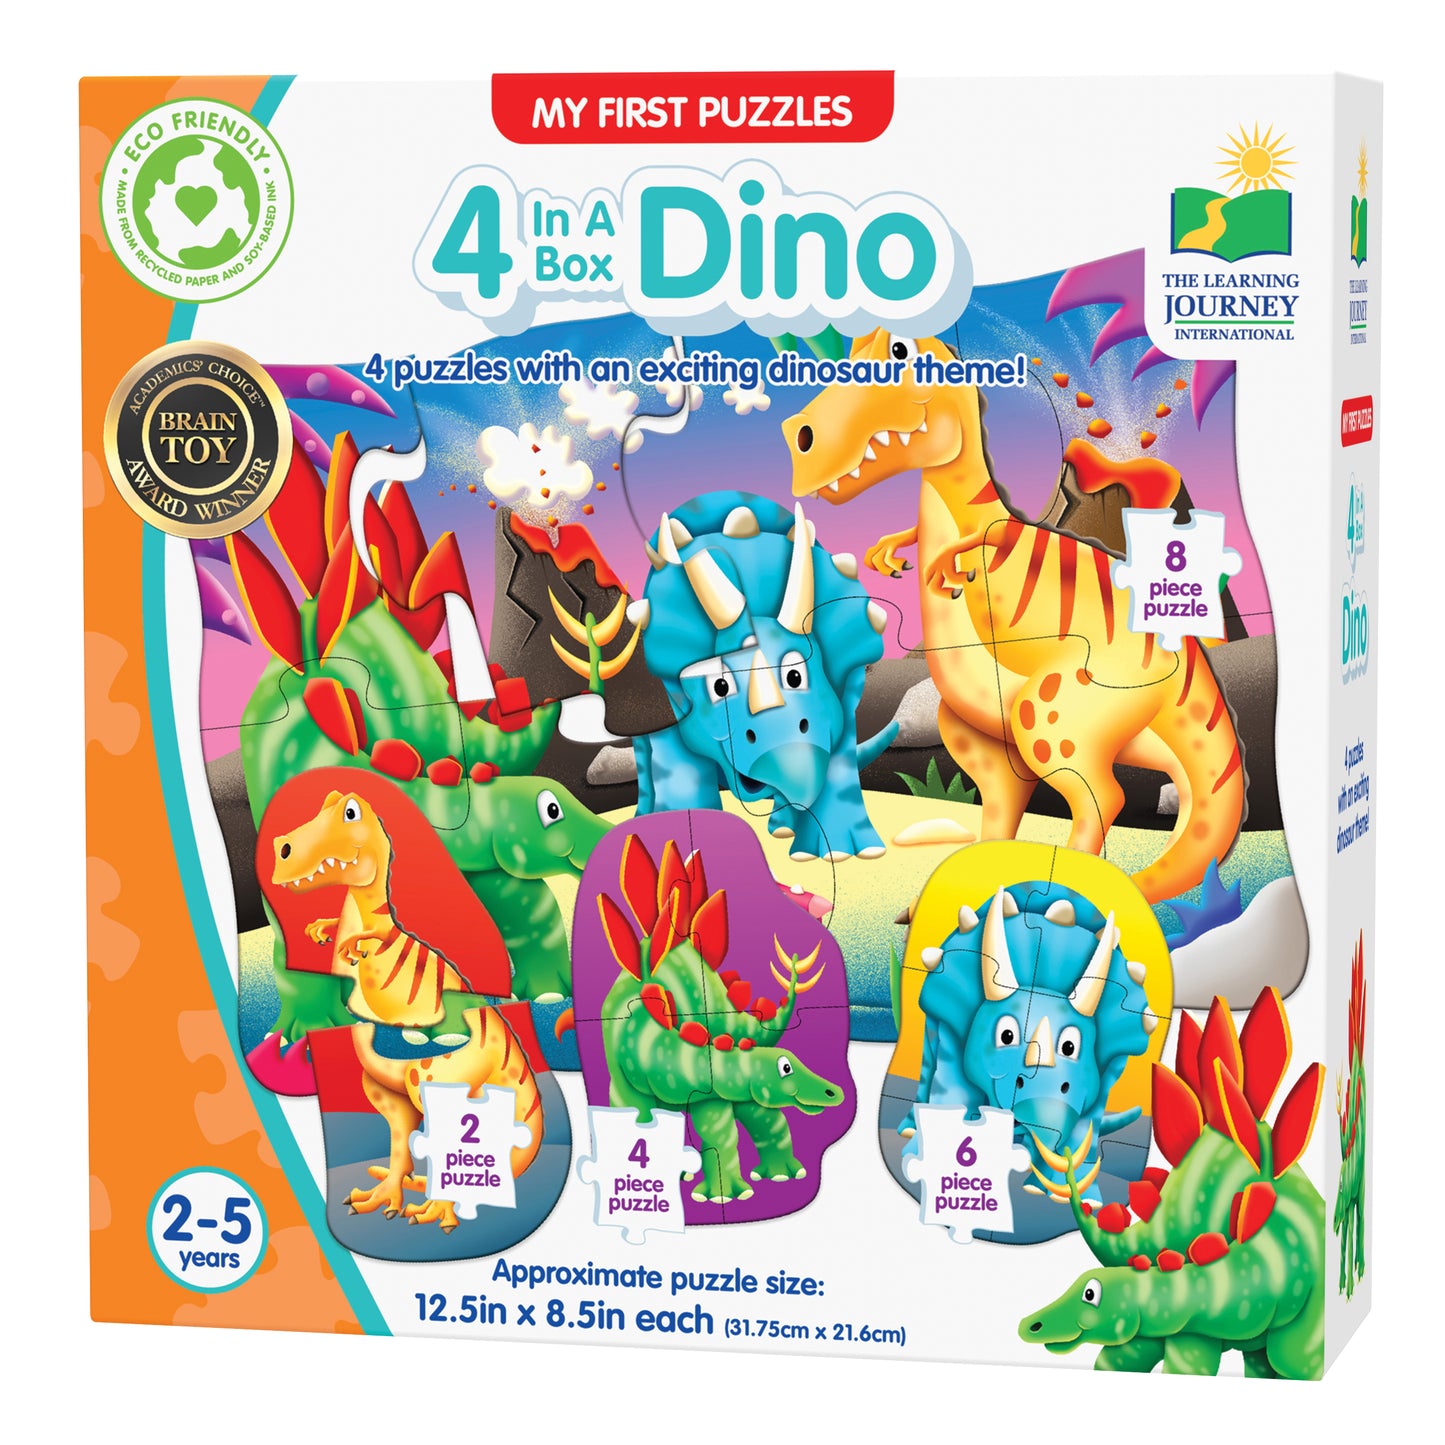 My First Puzzle Set - 4 in a box - Dino | Jigsaw Puzzle For Kids